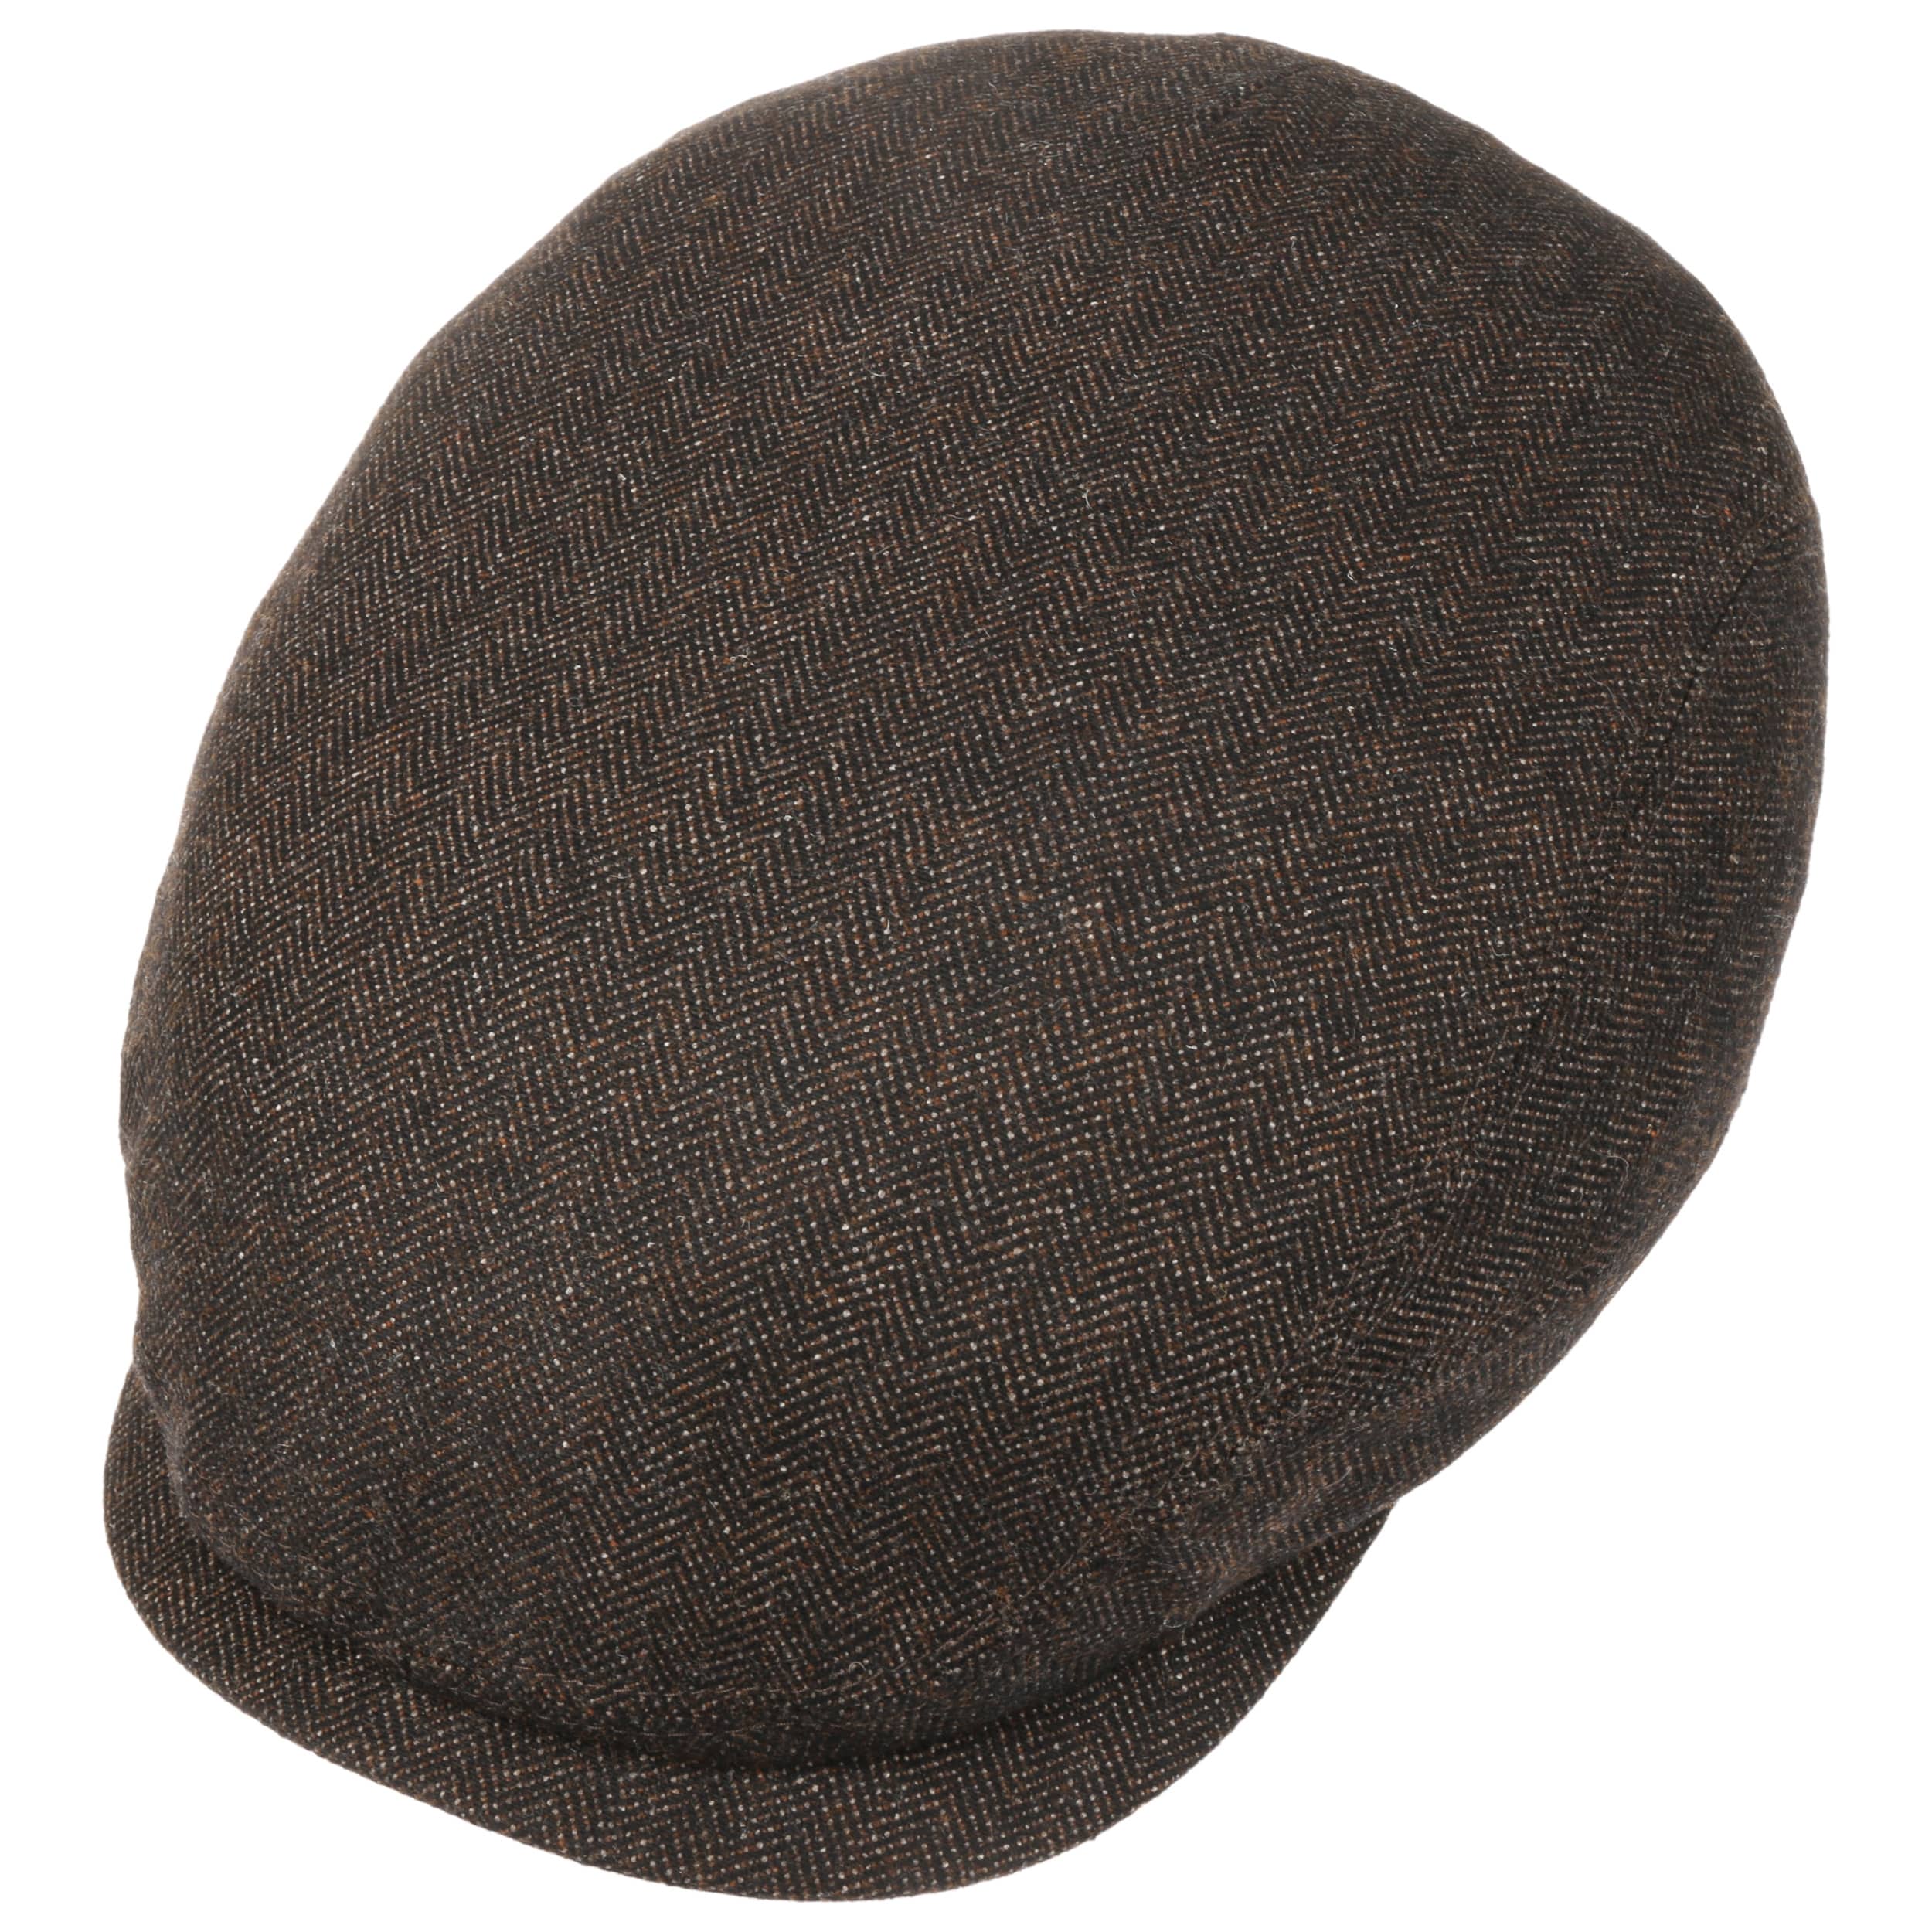 Chester Wool Silk Cashmere Flat Cap by Stetson - 159,00